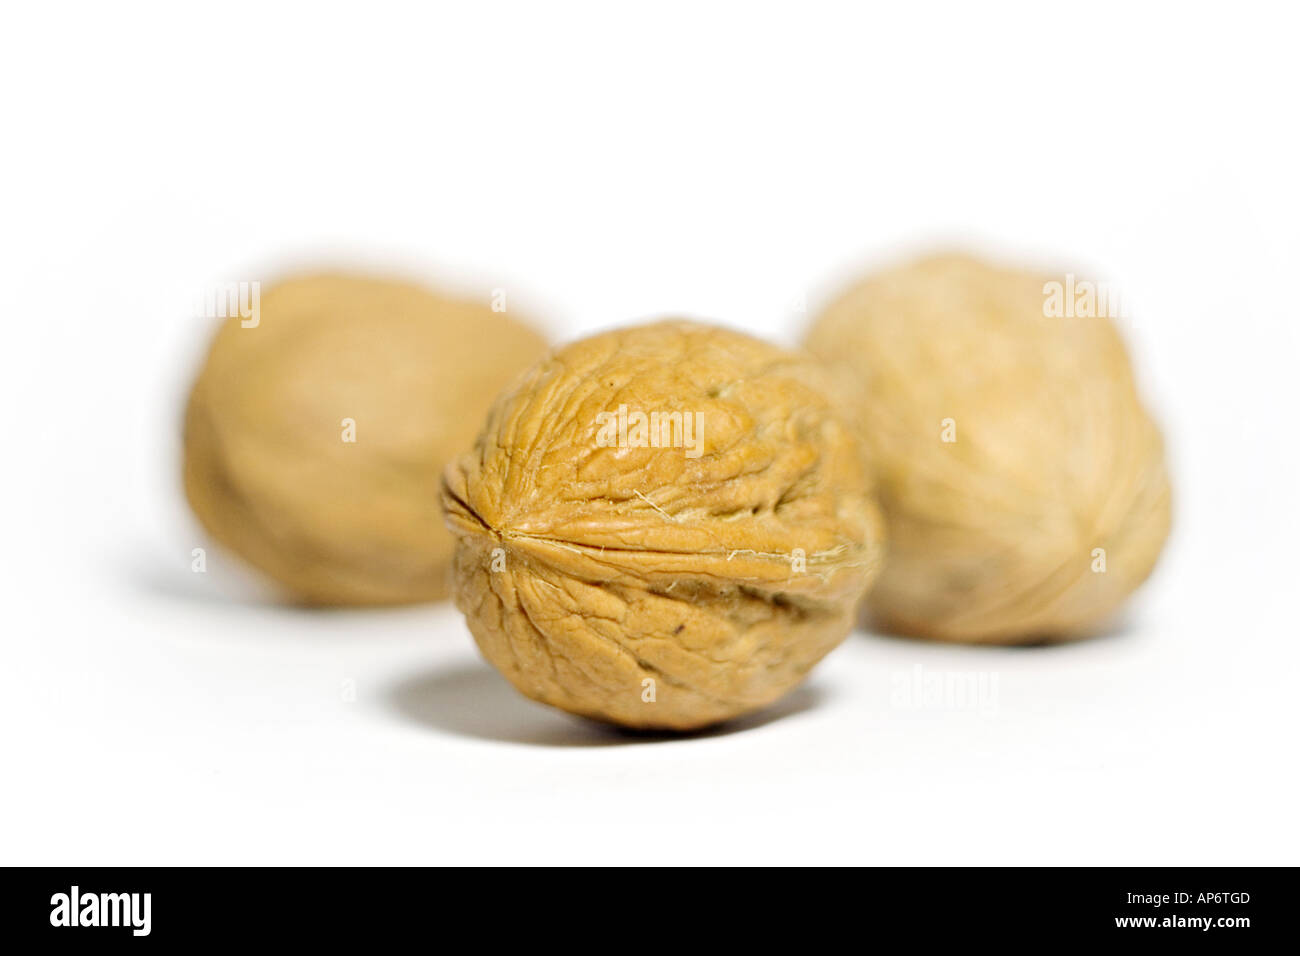 walnuts on a white background Stock Photo